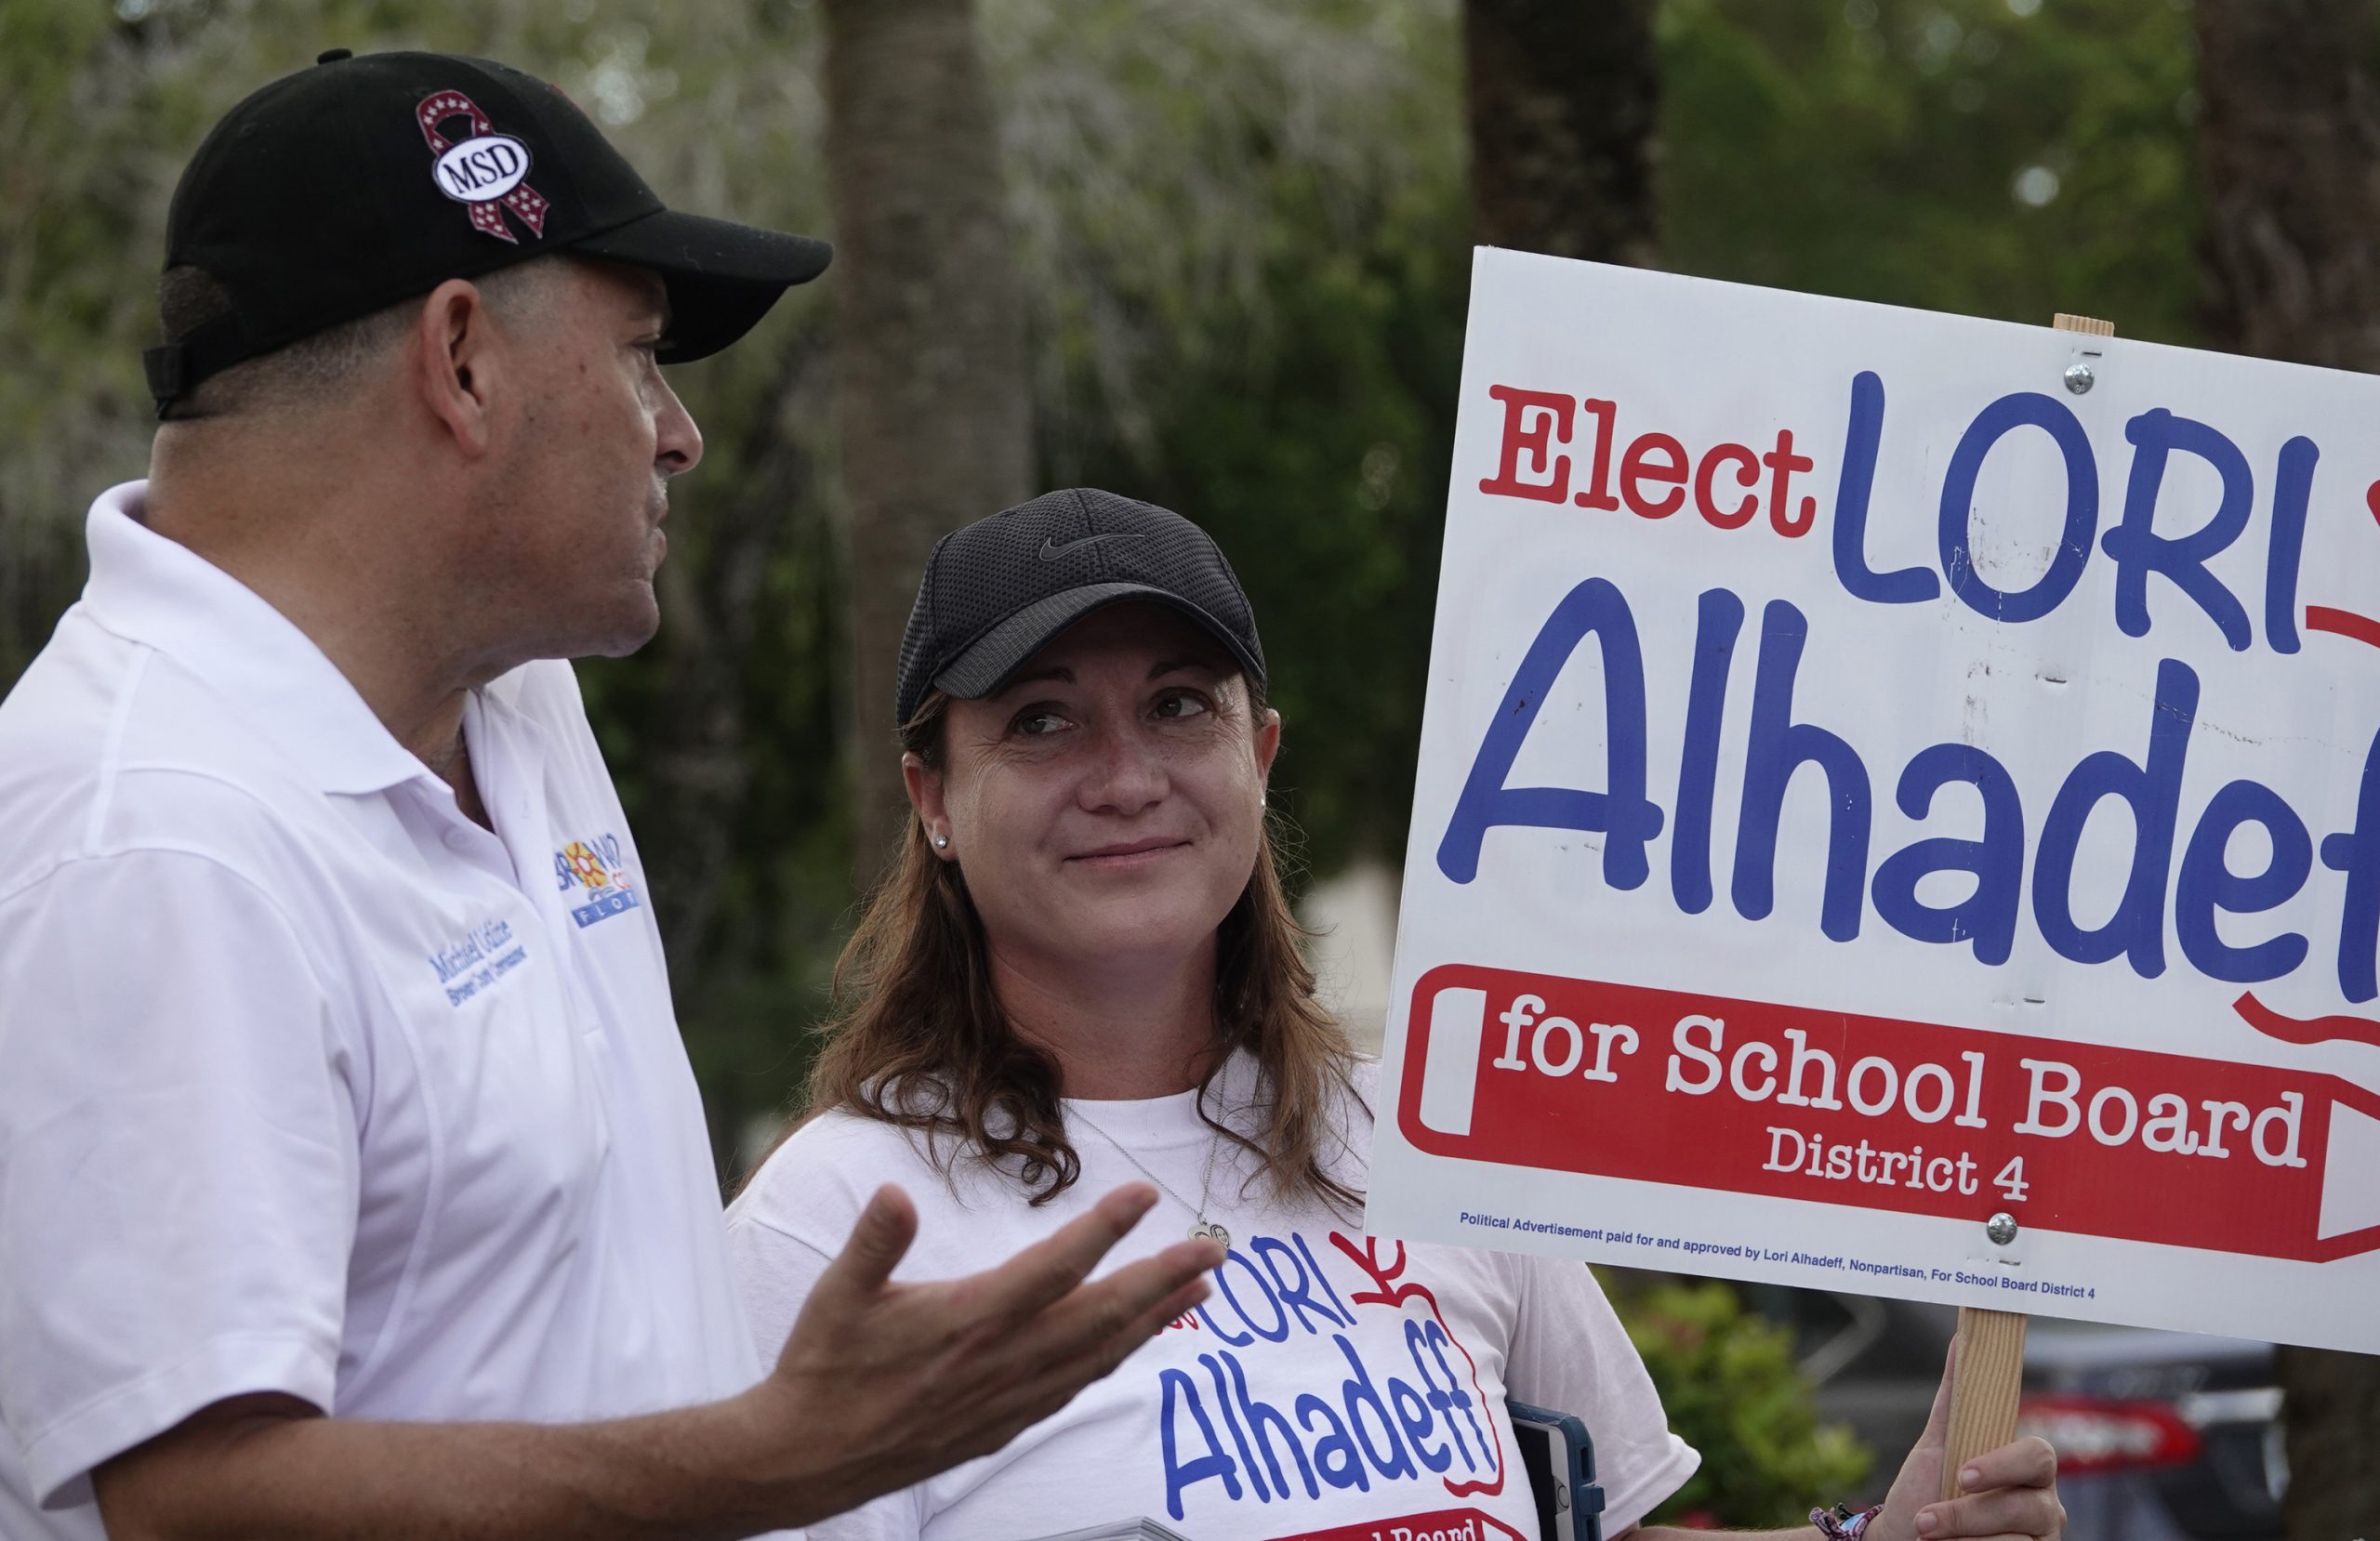 Lori Alhadeff speaks County Commissioner Michael Udine at a polling place in Tamarac, Fla., Tuesday, Aug. 28, 2018. Alhadeff has become a forceful advocate for gun control and school safety. (Joe Cavaretta/South Florida Sun Sentinel/TNS)